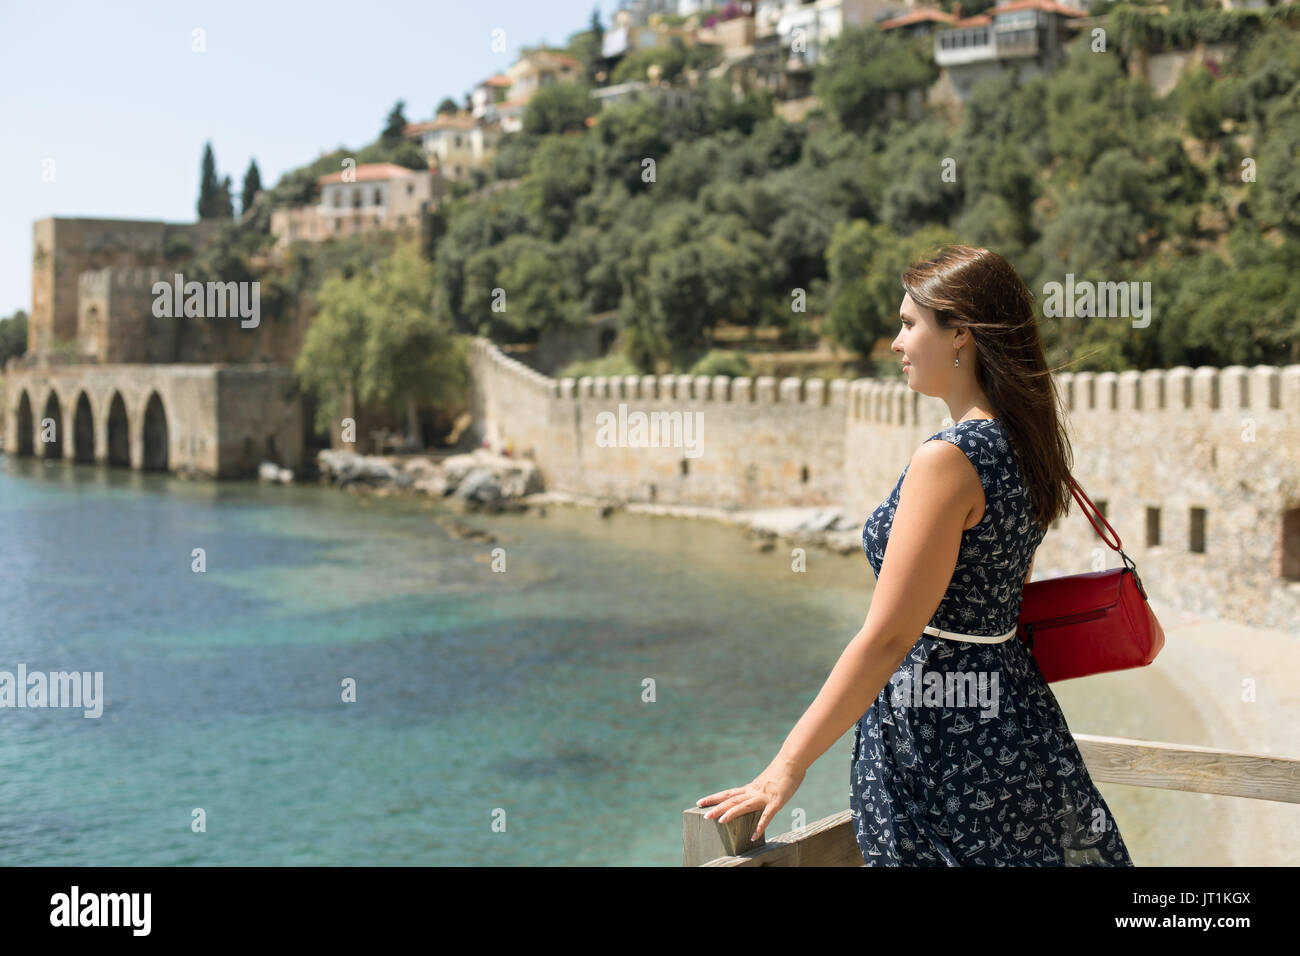 SIdeview portrait of beautiful woman with strait hair wearing dark blue dress  with white belt and red bag enjoying view of picturesque bay of Alanya  Stock Photo